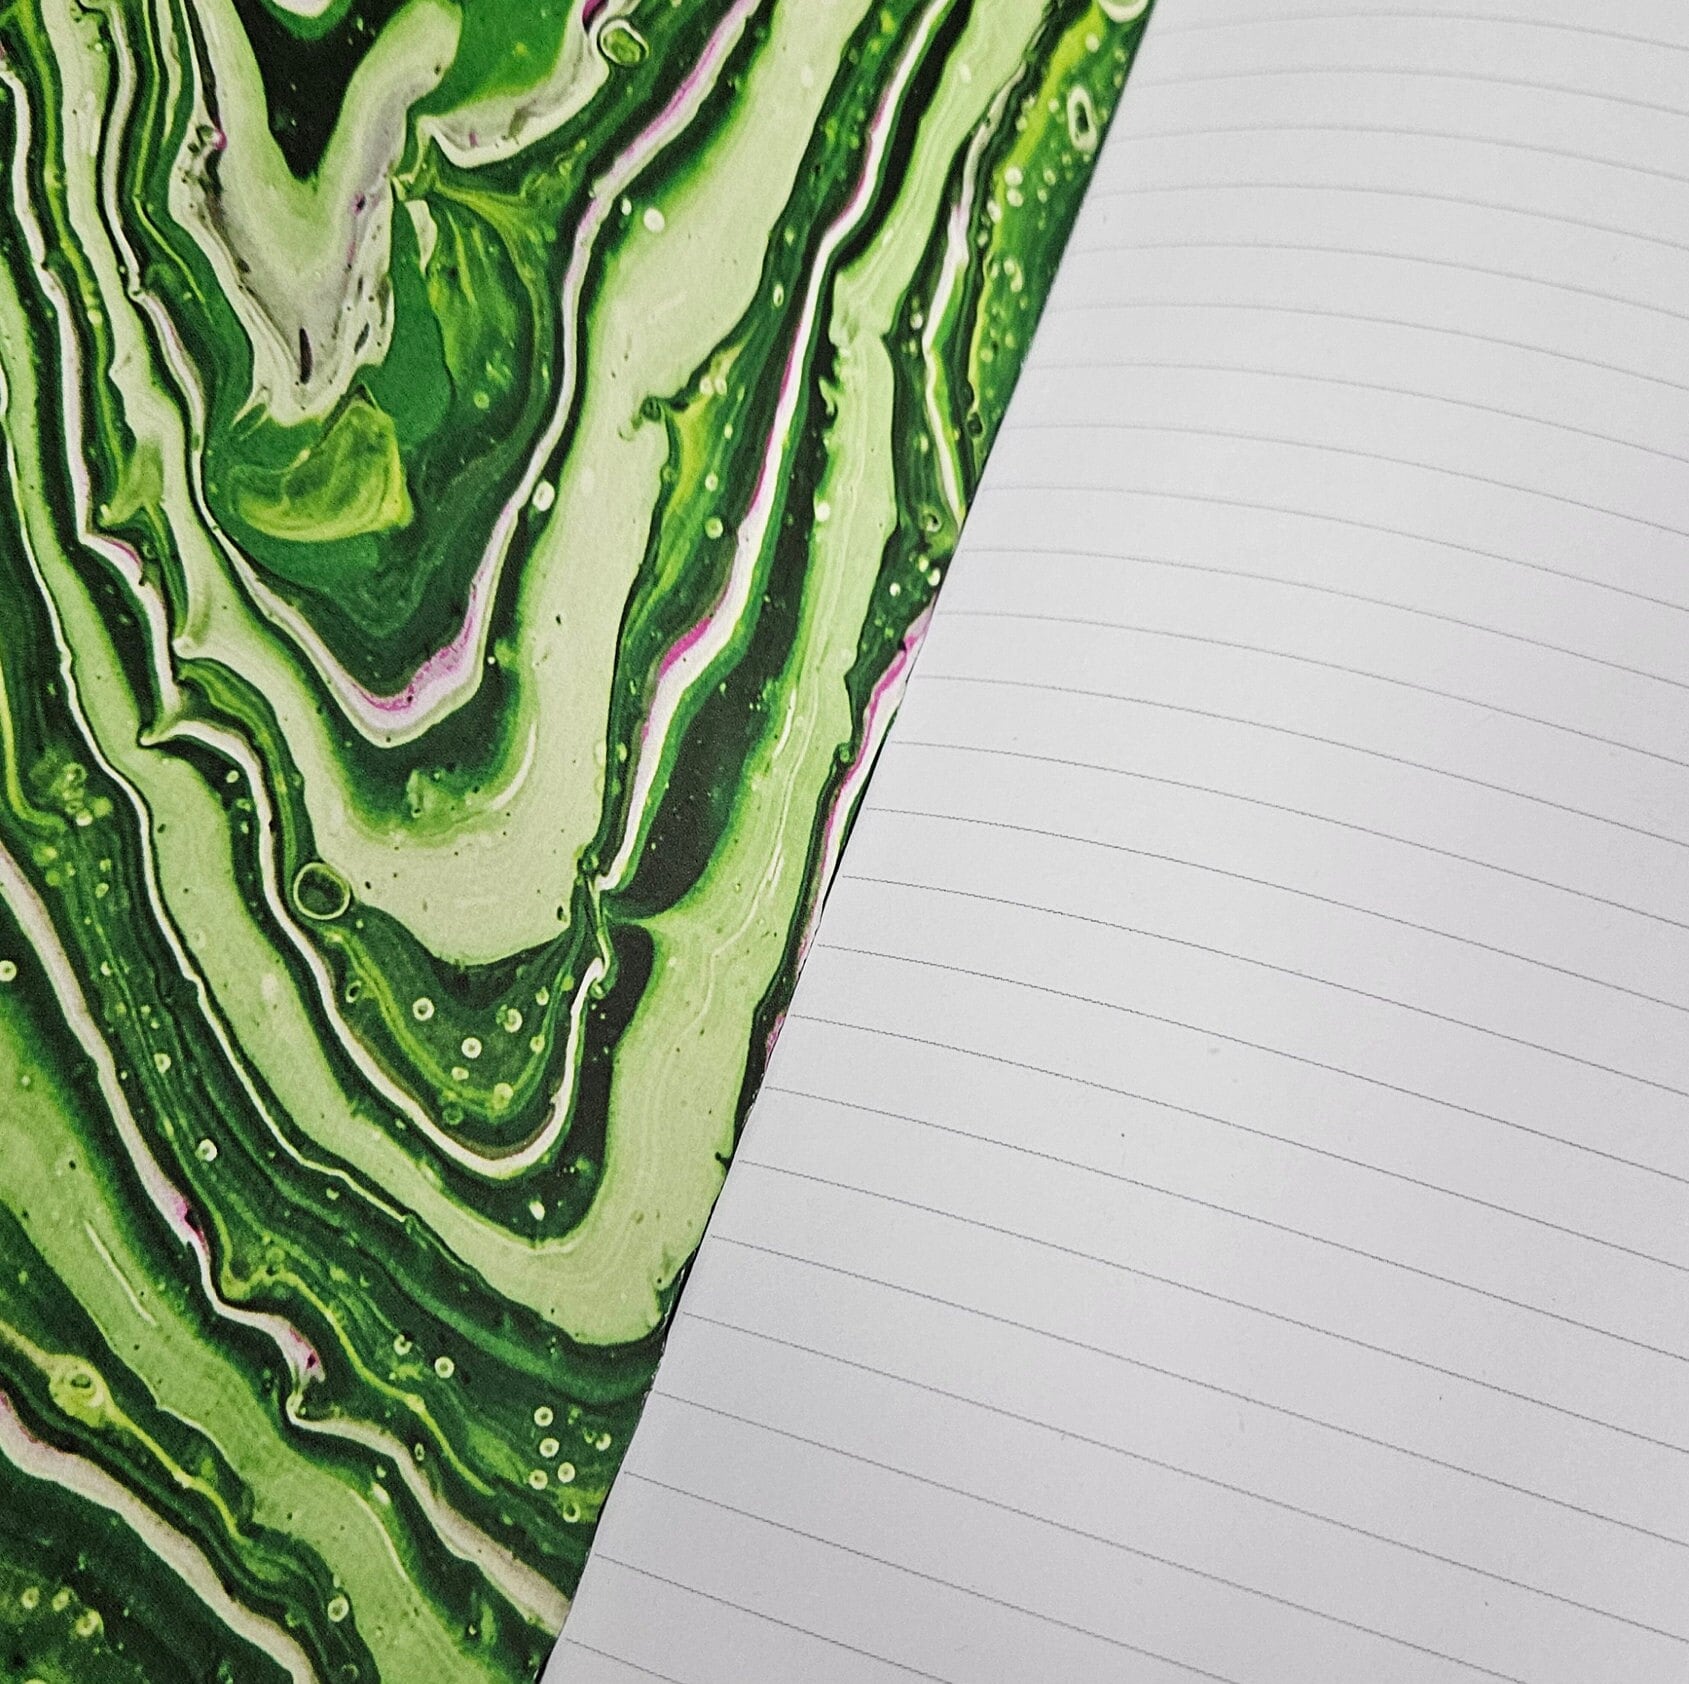 LAYFLAT NOTEBOOK: Peridot Crystal with College Ruled Lined Pages